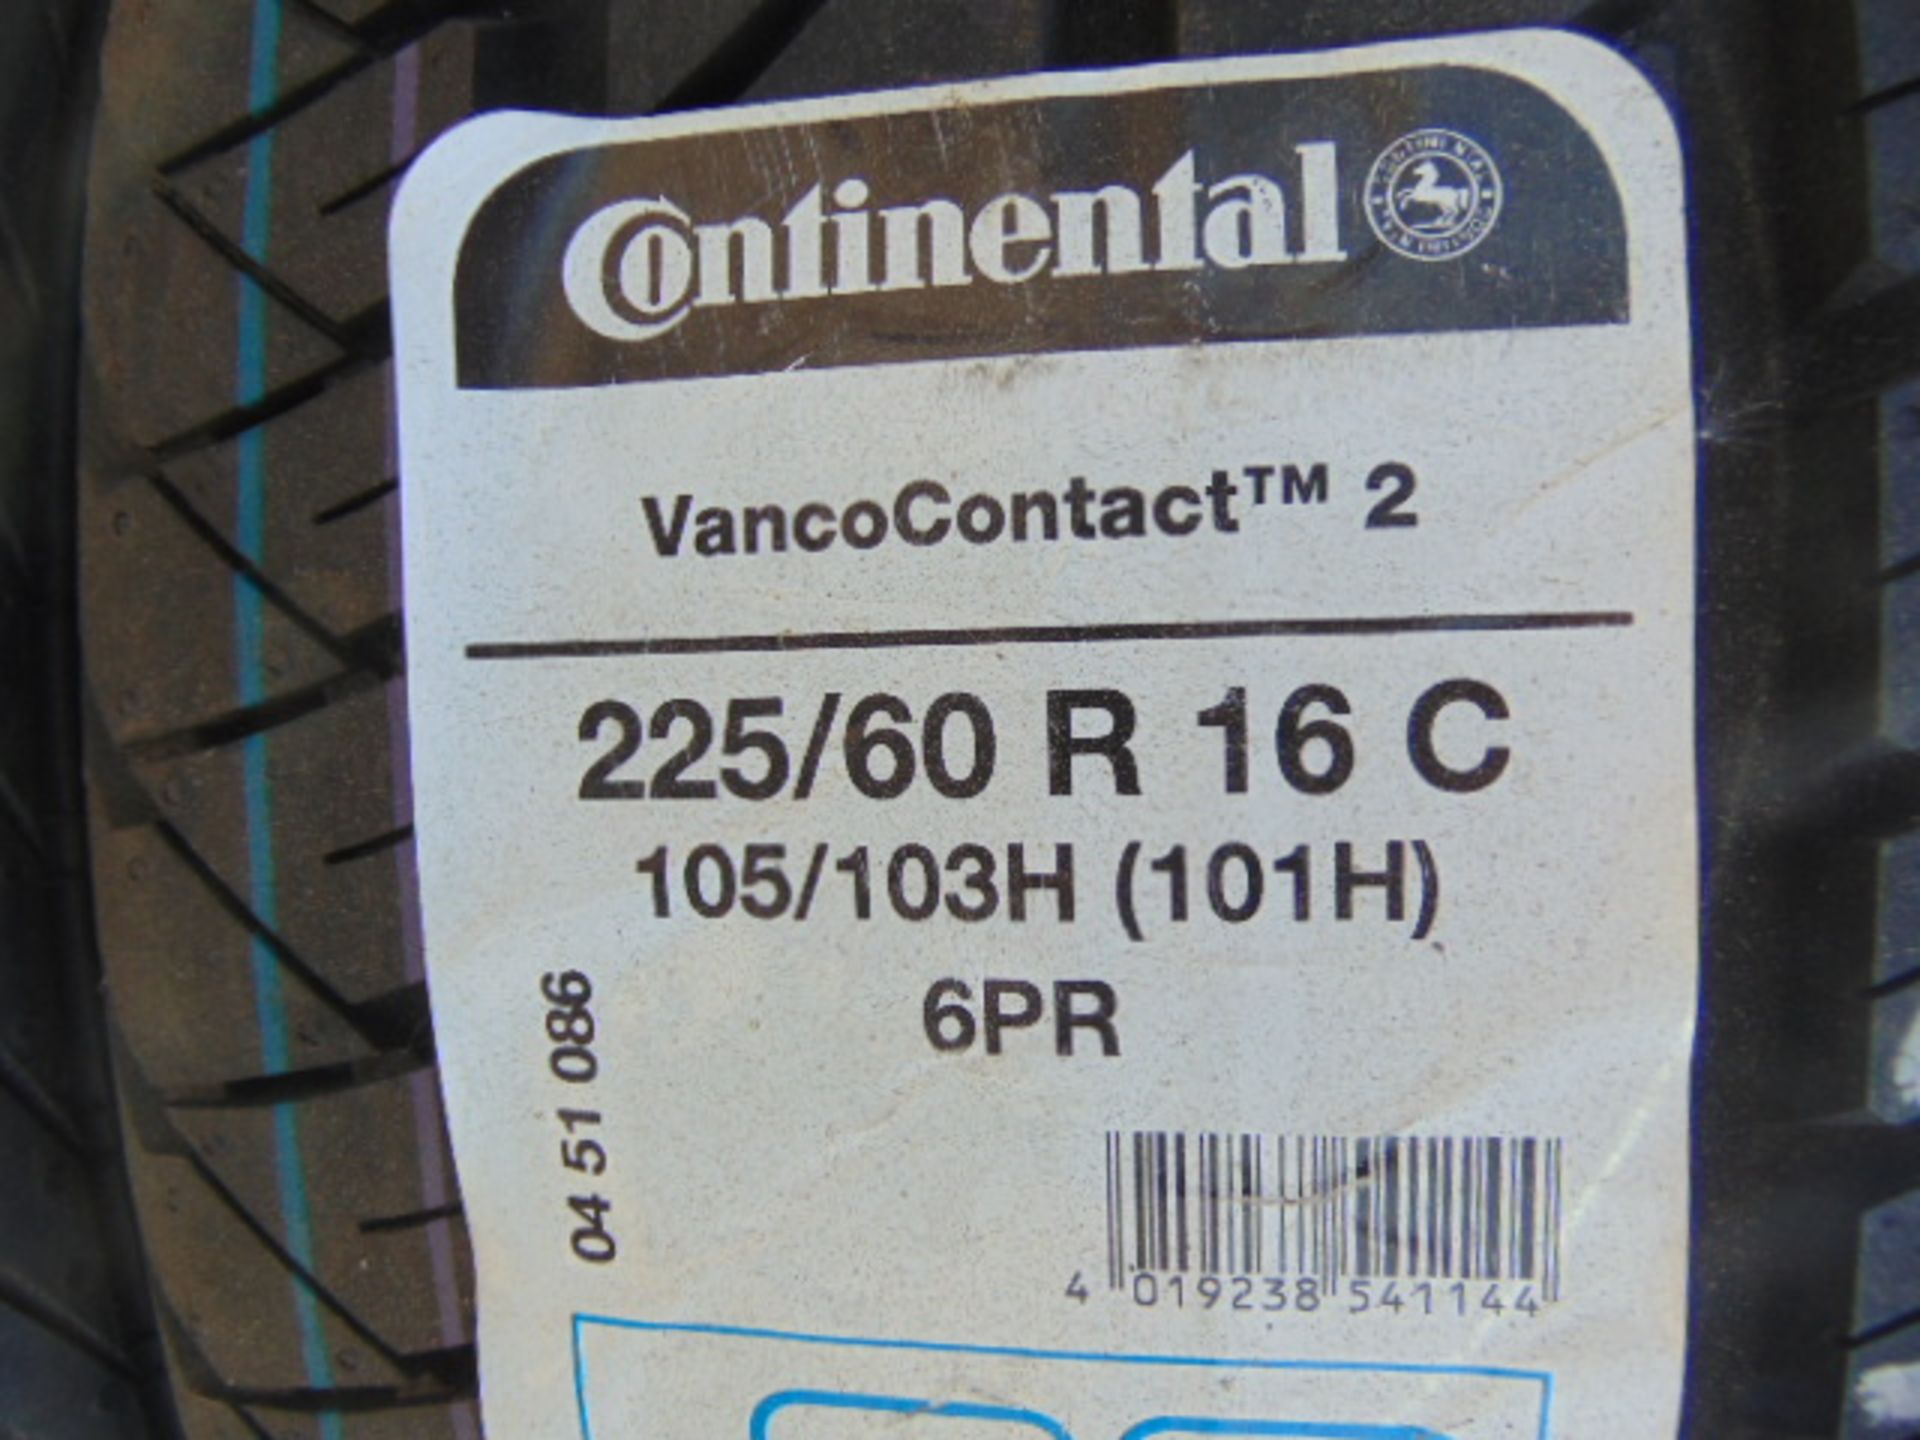 4 x Continental Vanco Contact 2 225/60 R16 C Tyres - Image 3 of 7